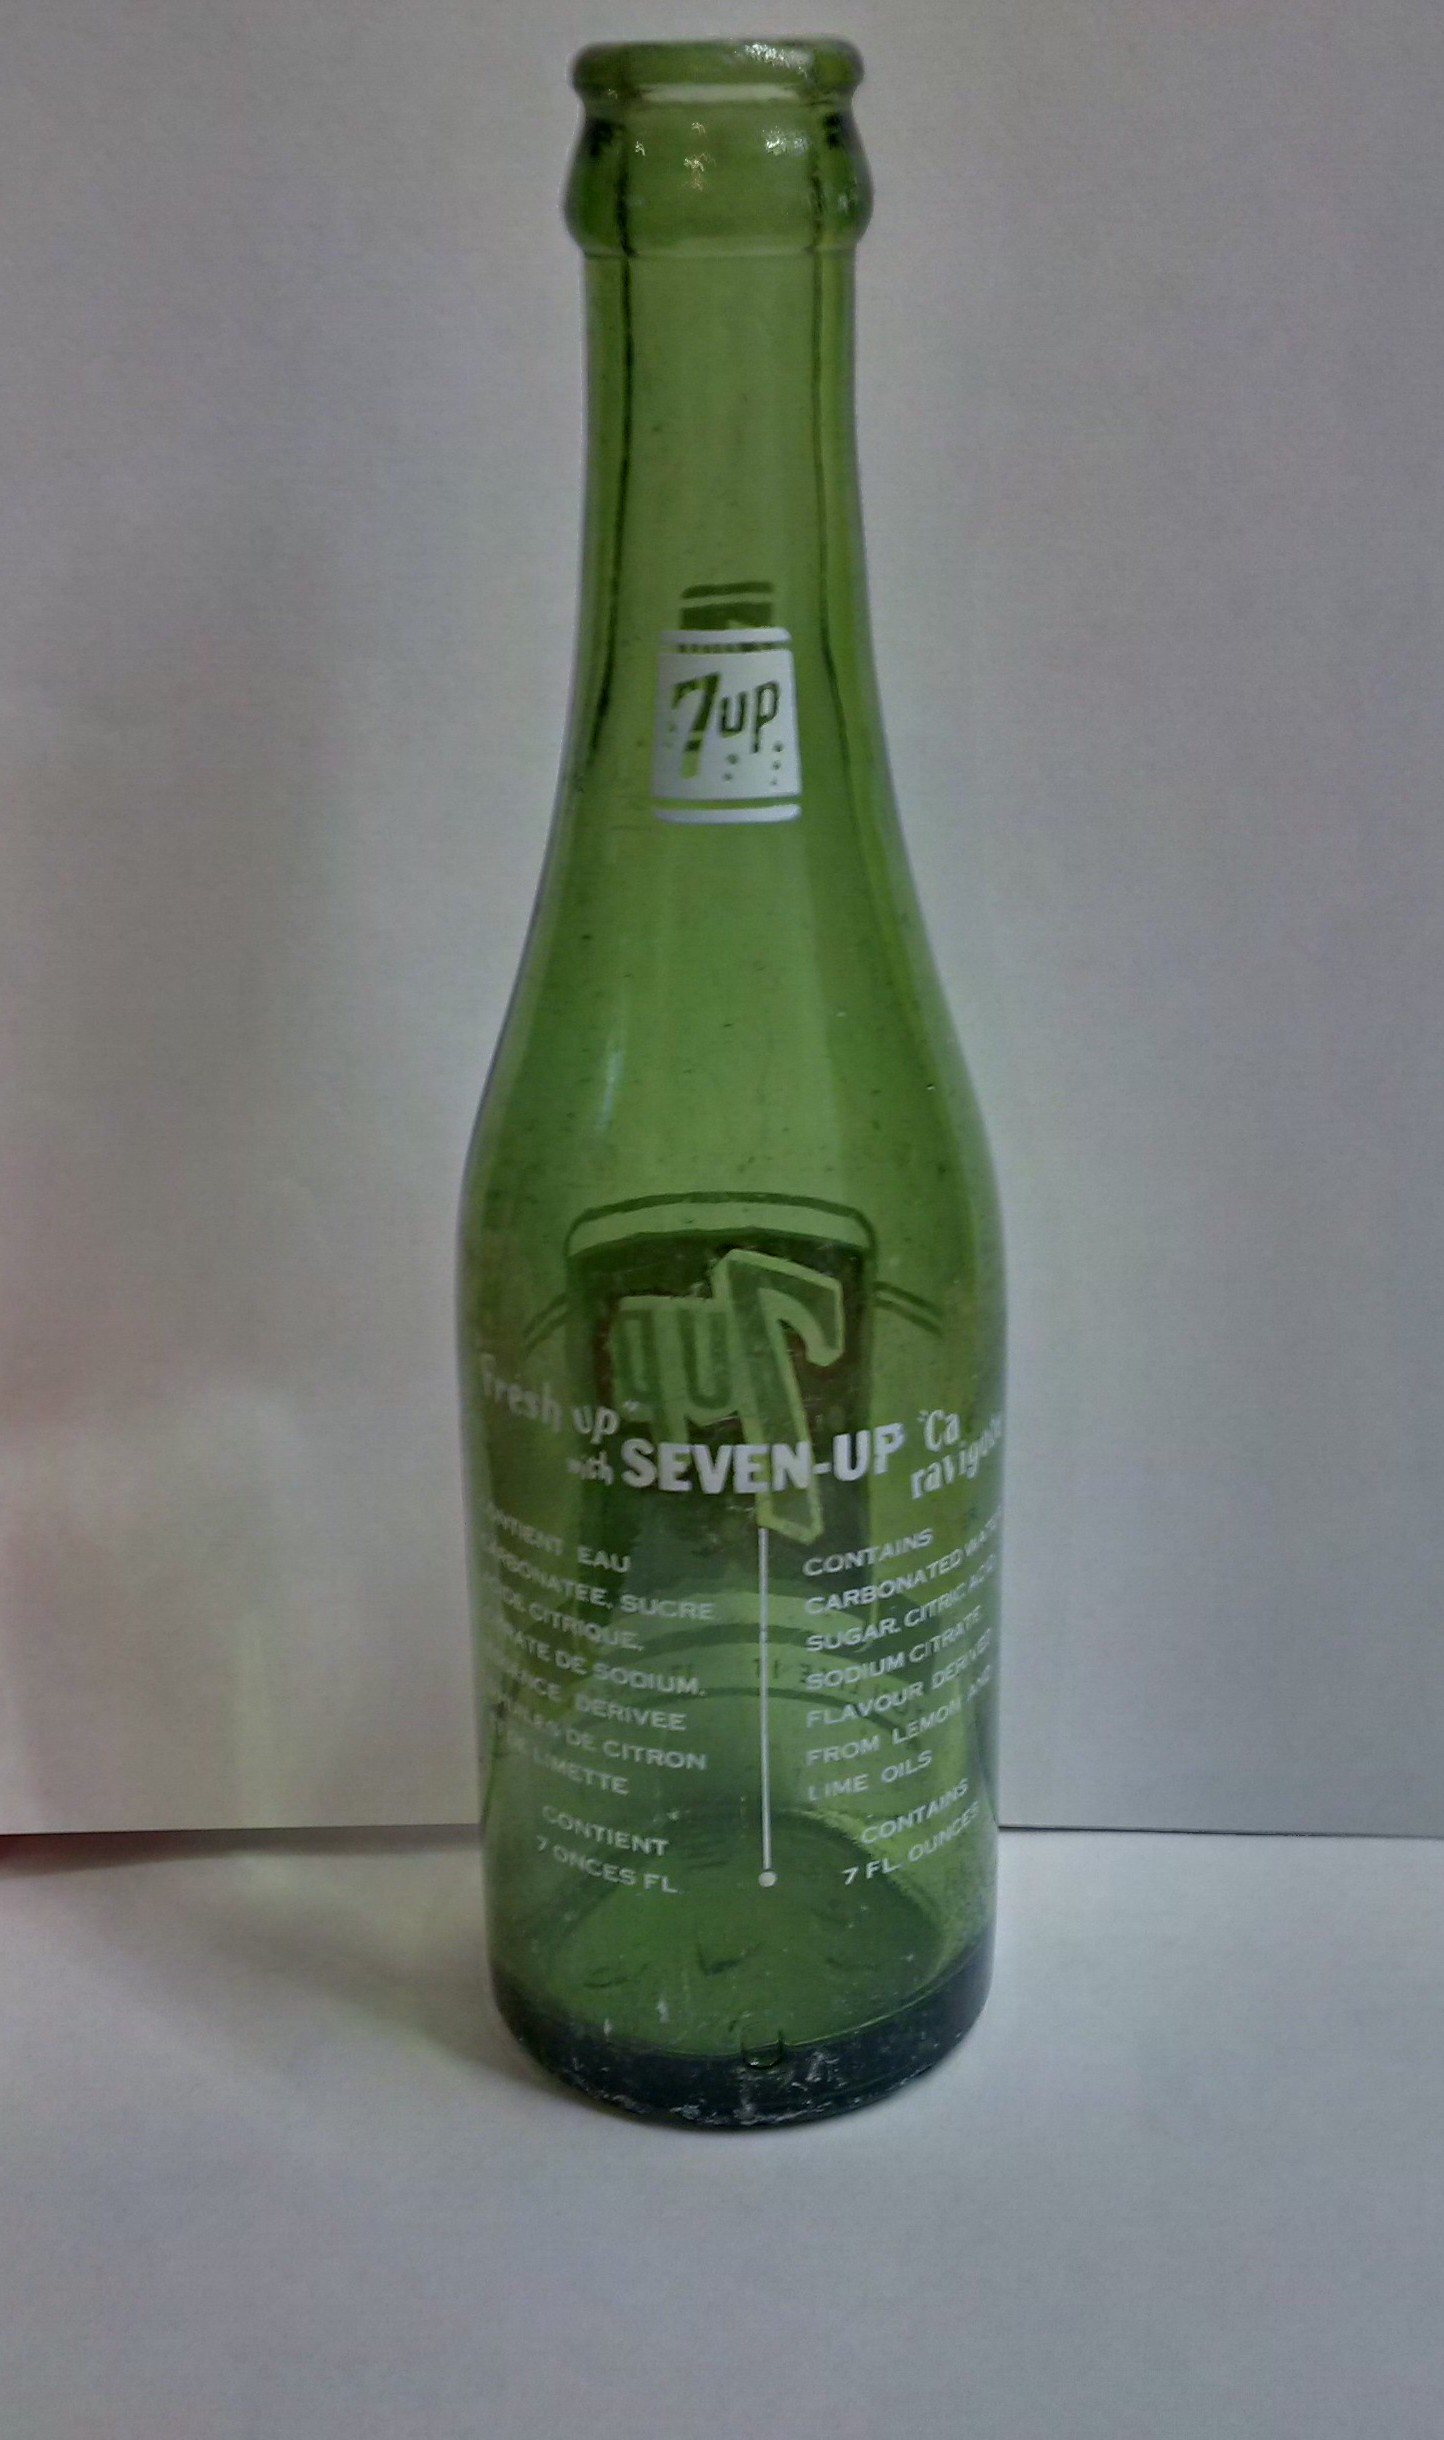 Vintage 7up Bottles and Can Identification HELP